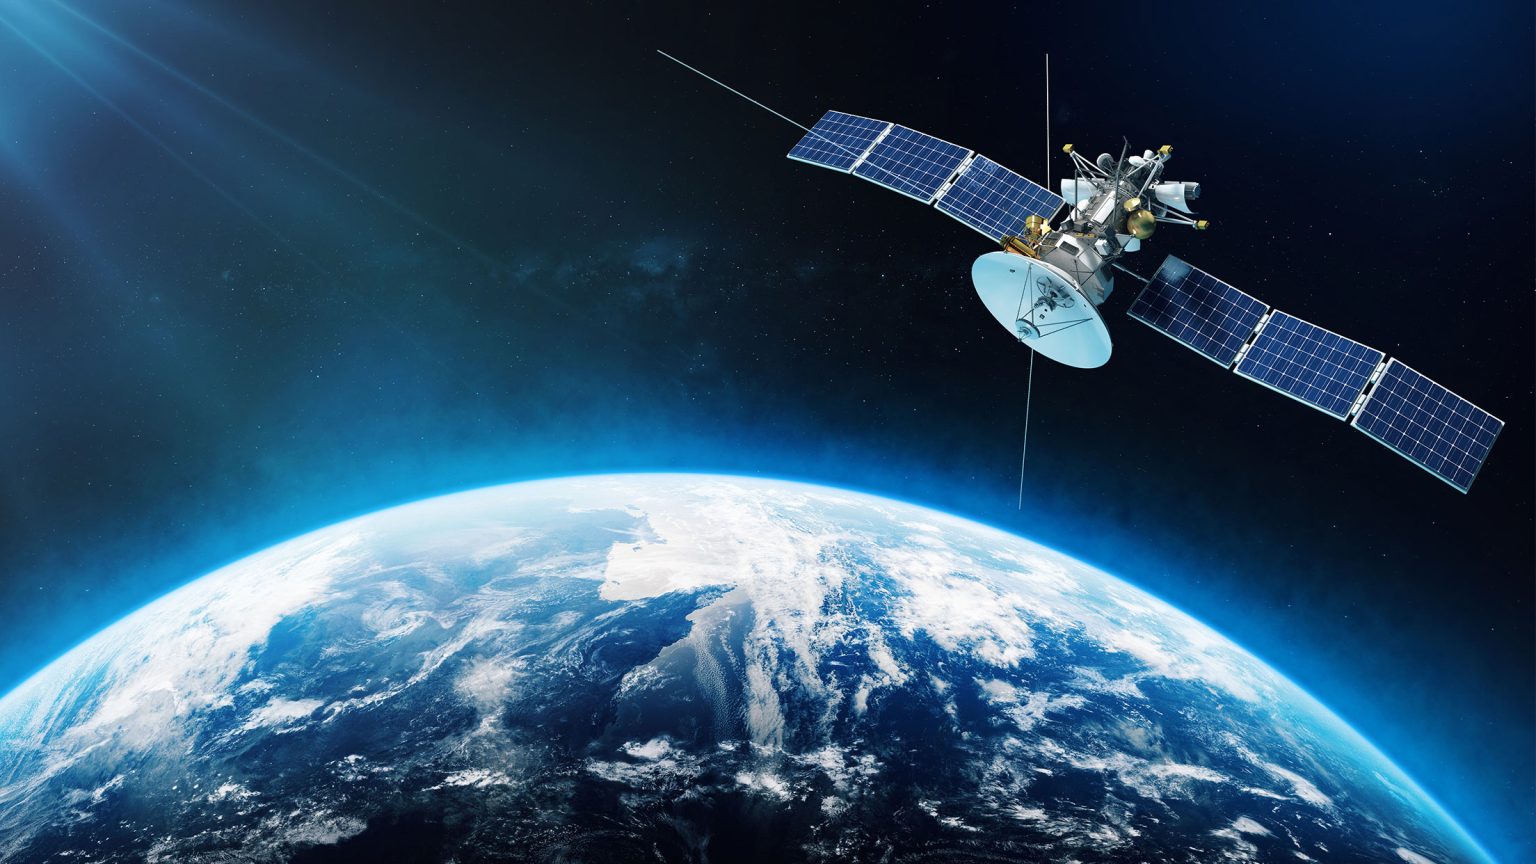 OneWeb, Which To Date Launched 110 Out Of A Planned Constellation Of 648 Satellites To Provide Global Internet Access, Raises $1.4B From SoftBank And Hughes (Ingrid Lunden/TechCrunch)